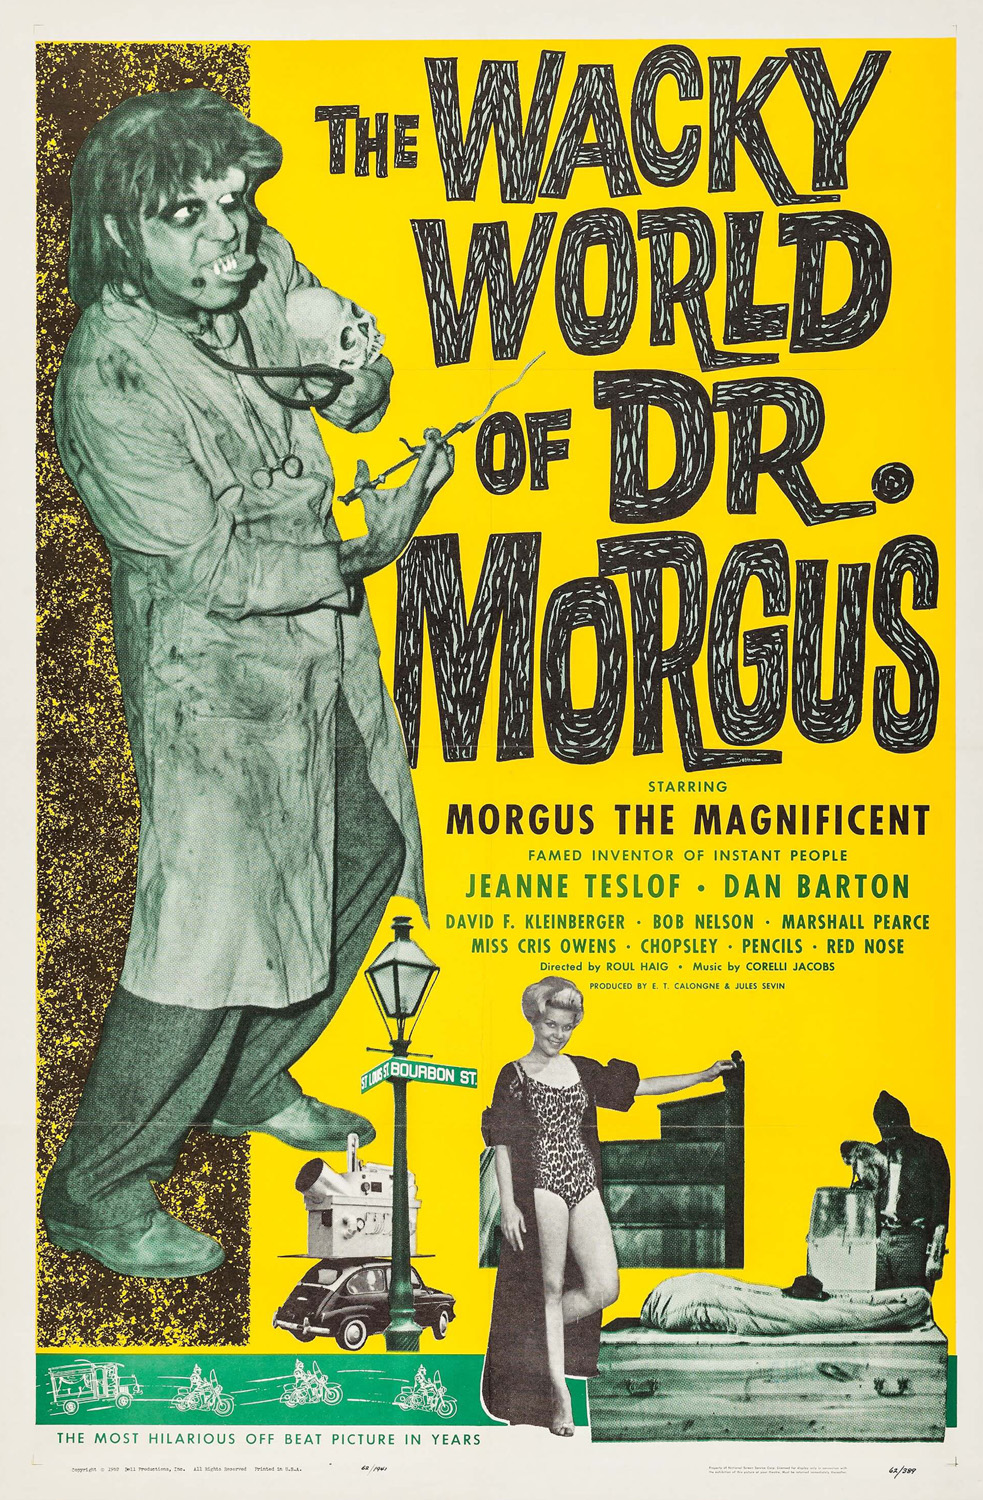 WACKY WORLD OF DR. MORGUS, THE